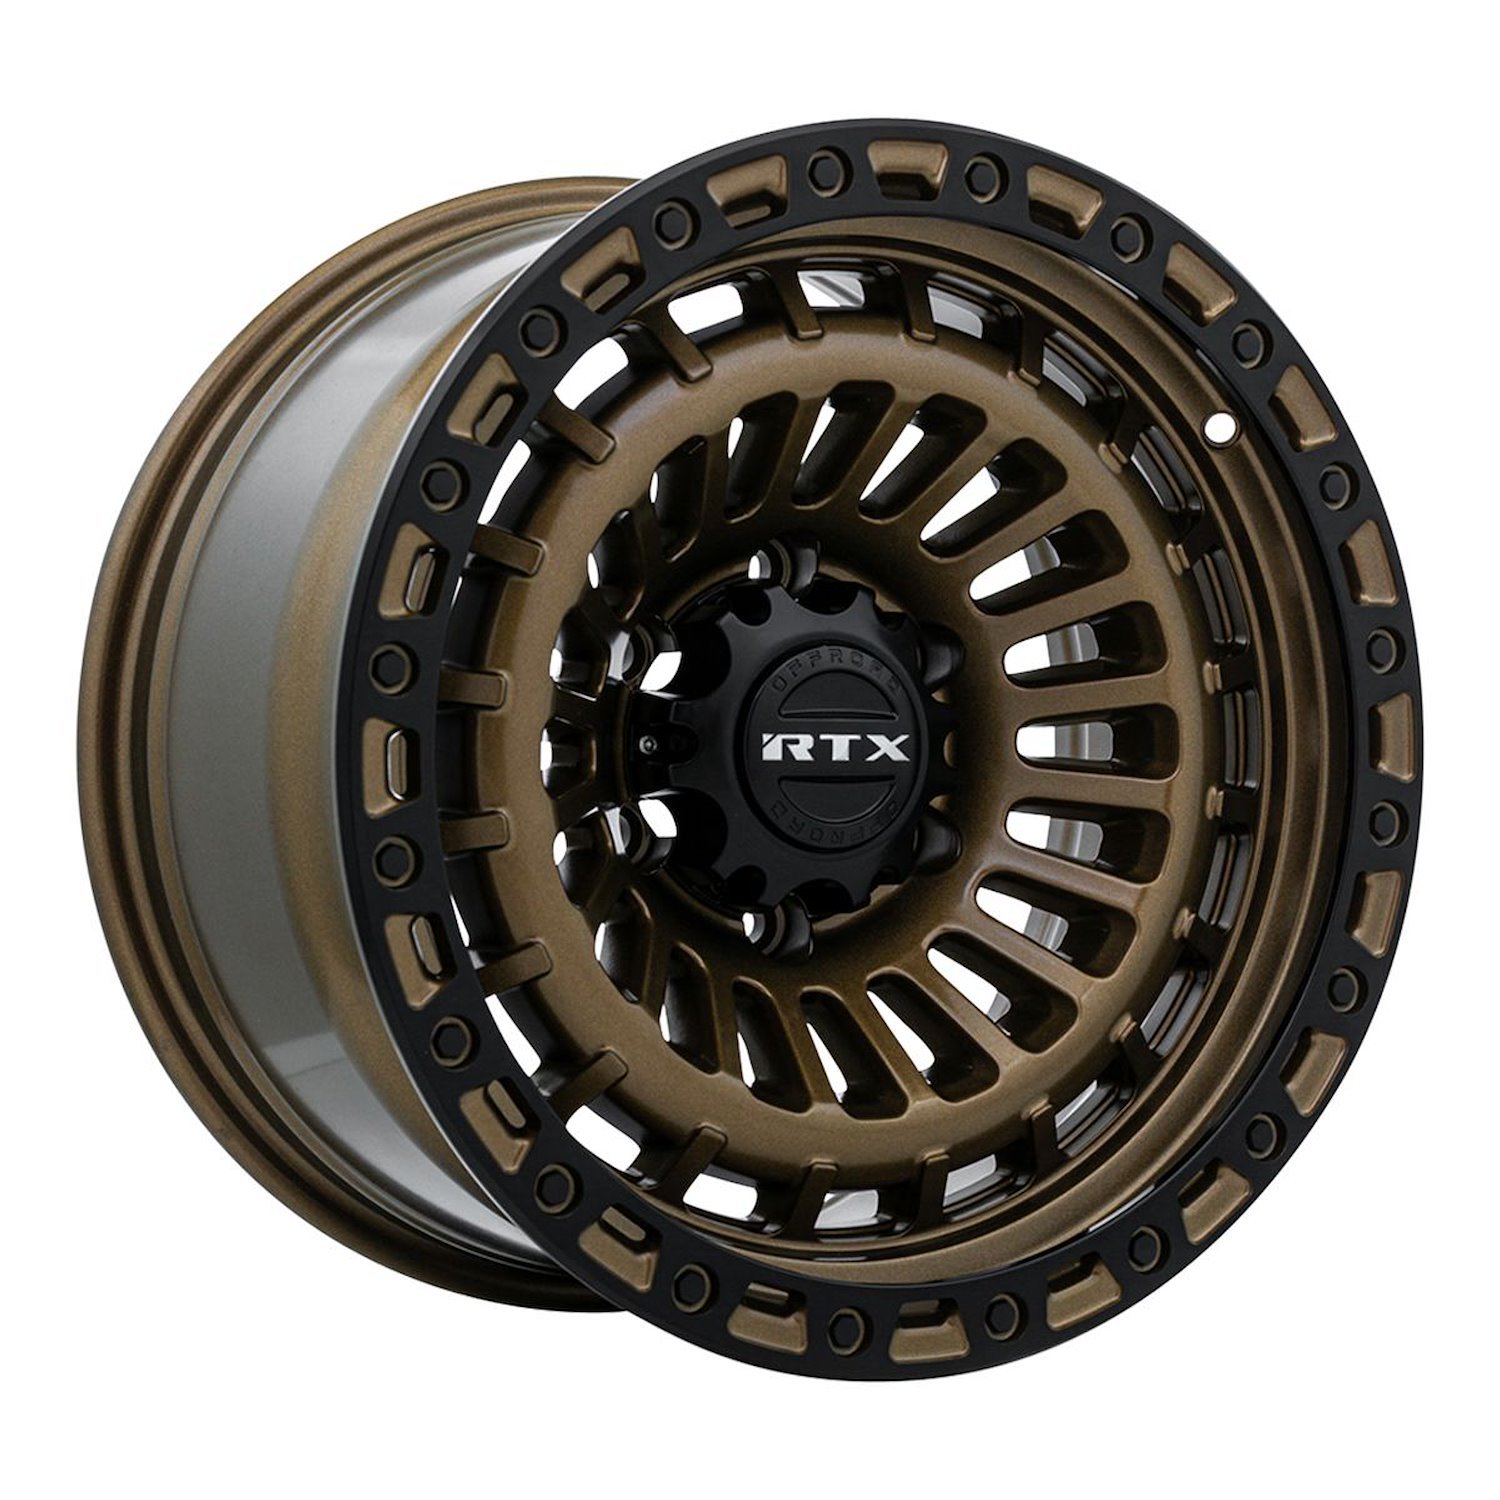 083097 Off-Road Series Moab Wheel [Size: 17" x 9"] Bronze with Satin Black Lip Finish